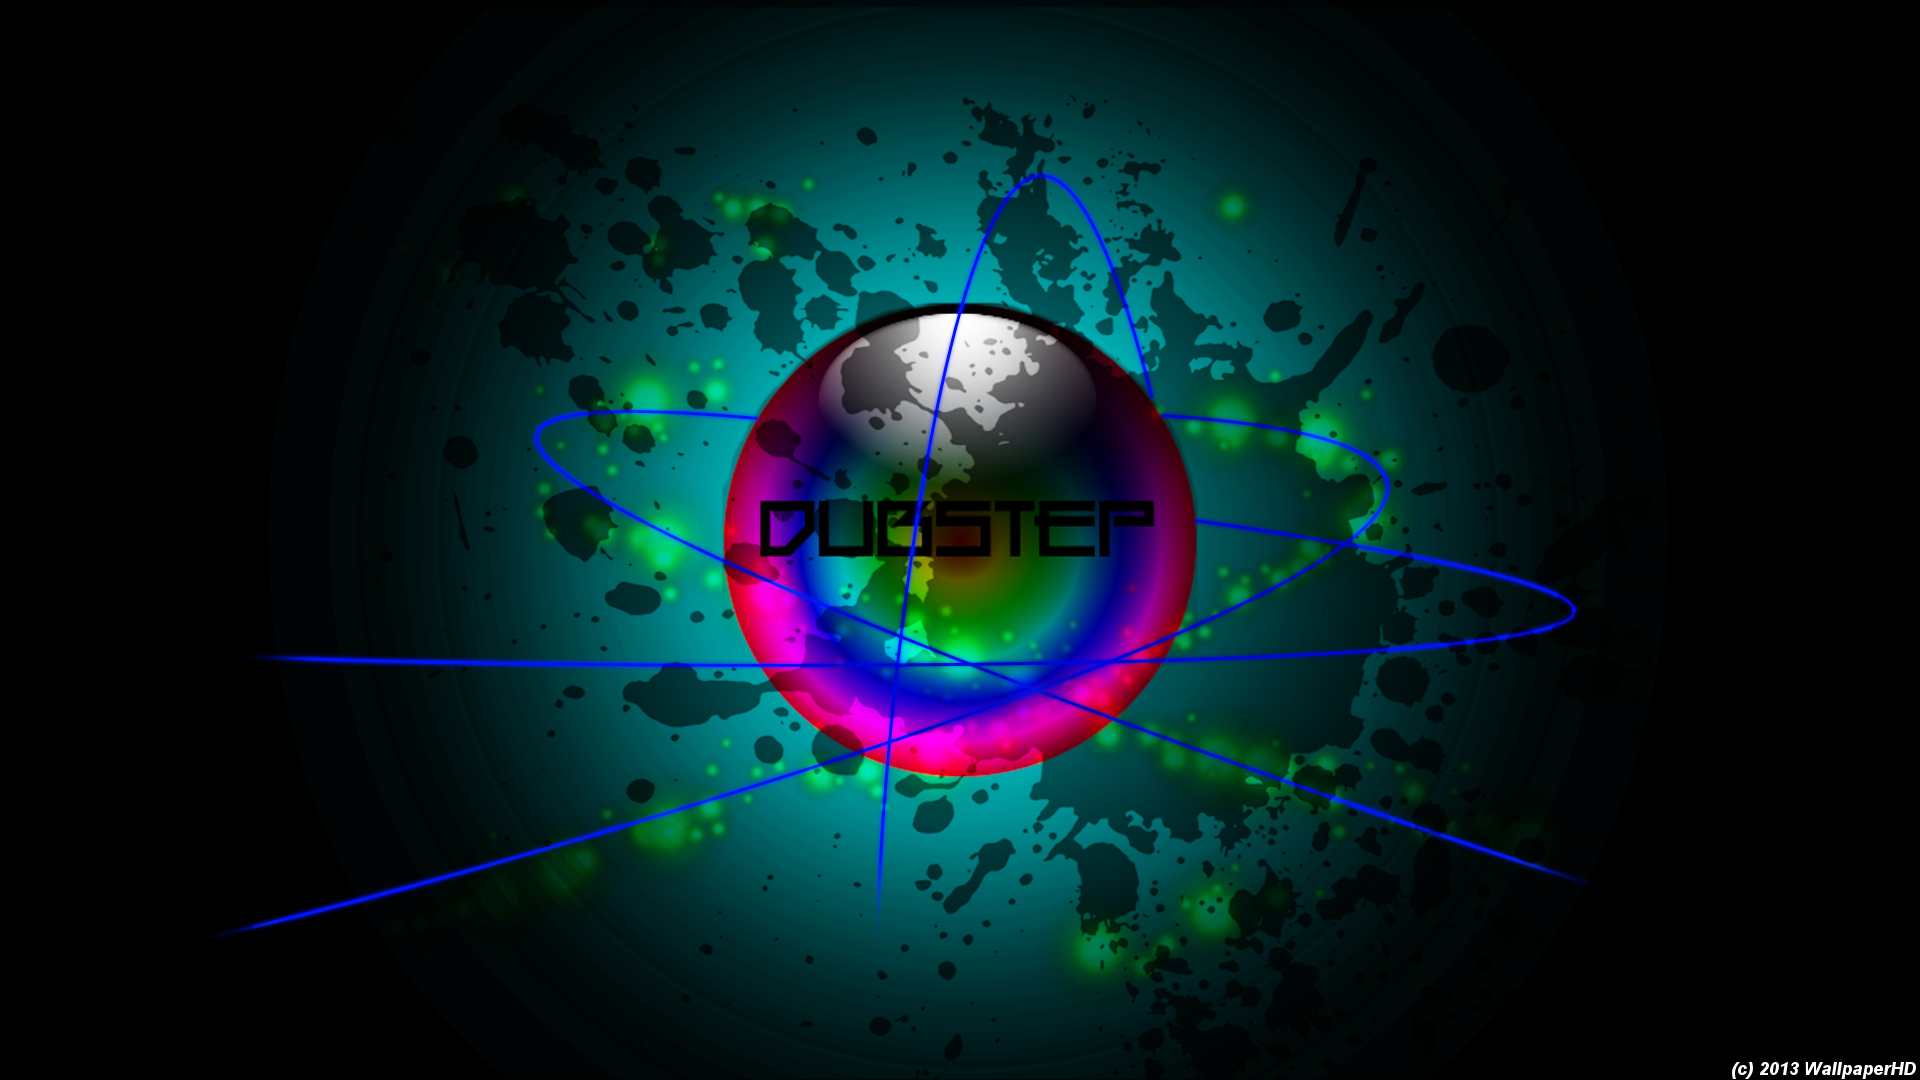 Cool Dubstep Wallpaper HD By